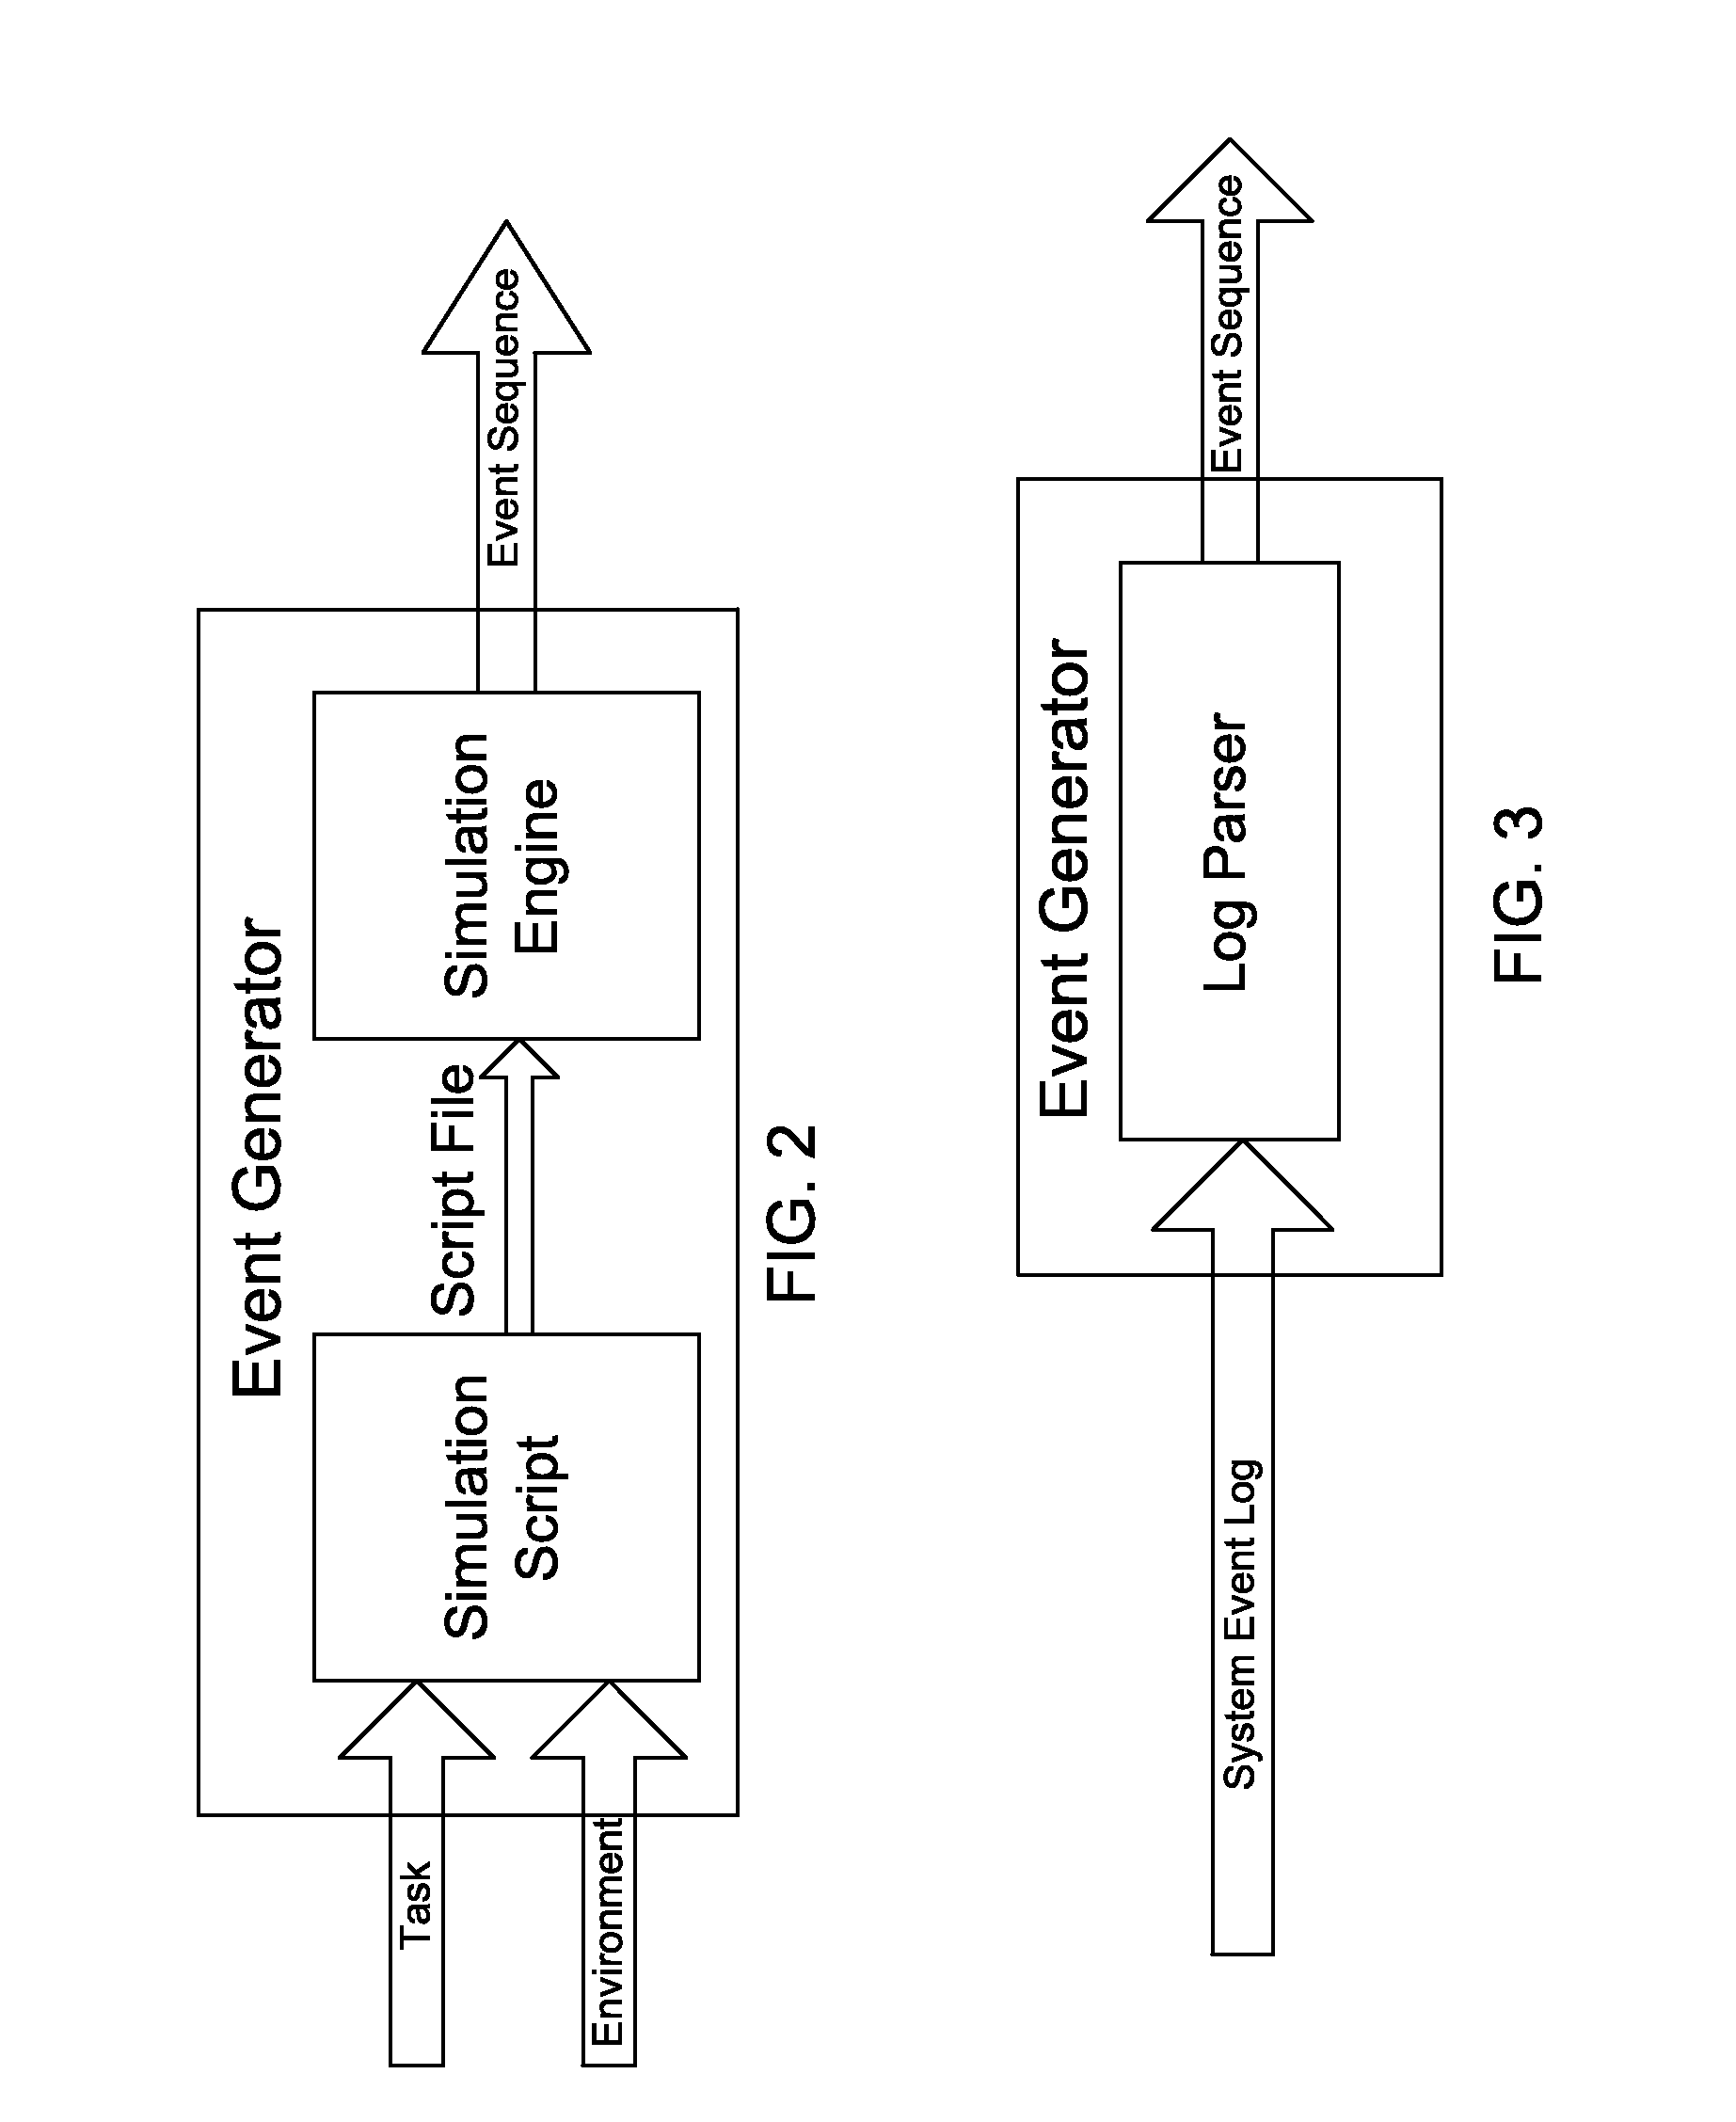 Energy Consumption Simulation and Evaluation System for Embedded Device